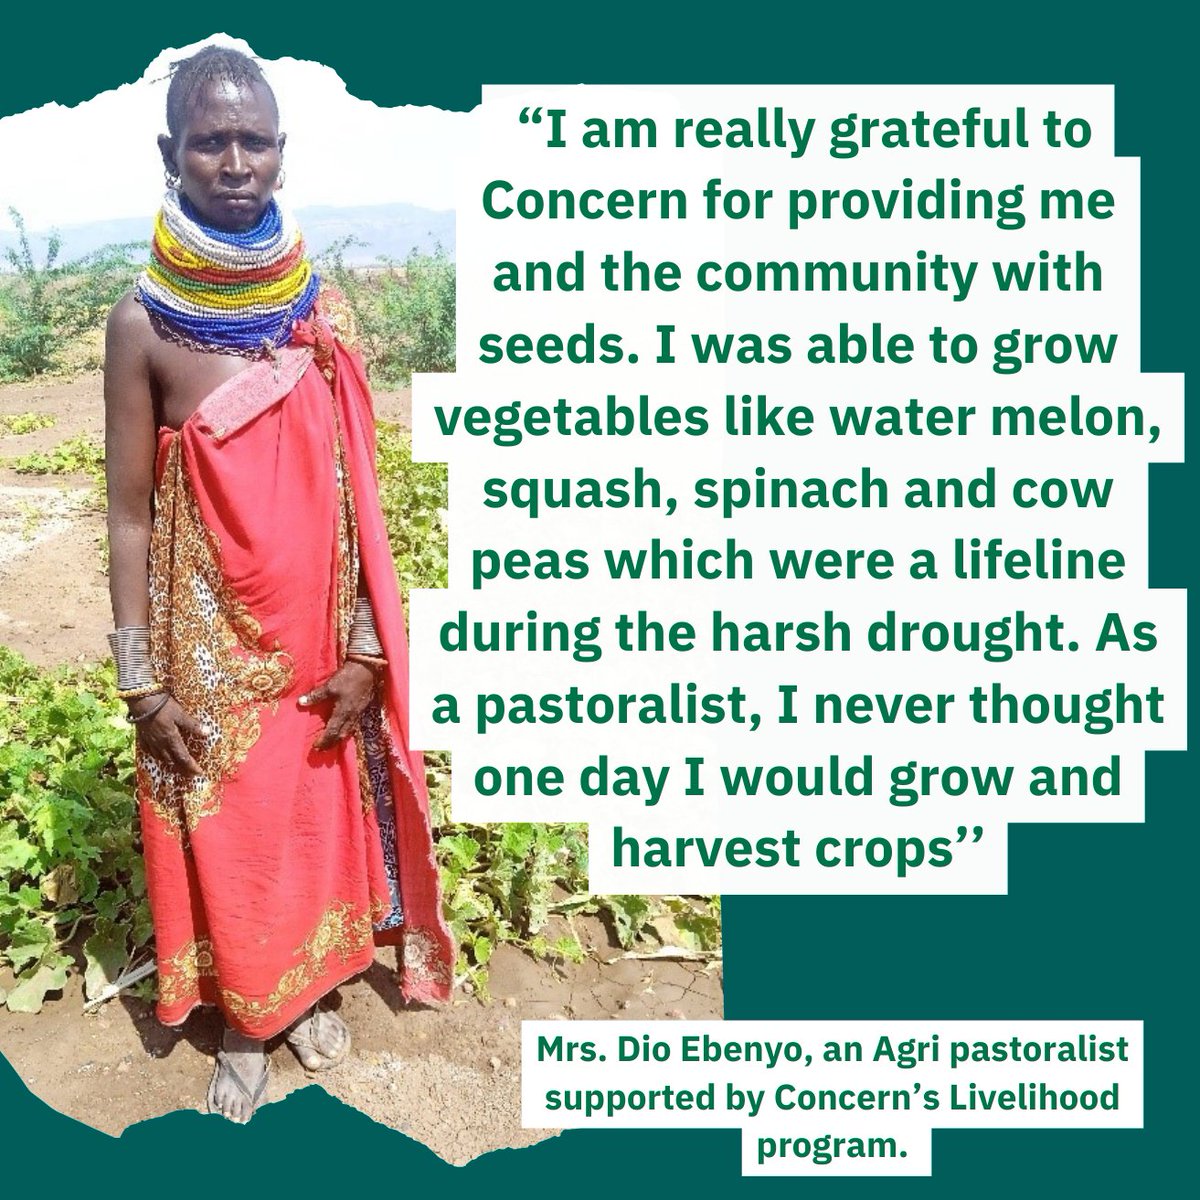 ✅Through support from partners such as @USAIDSavesLives and @funds4disaster, we continue to work with local communities in the ASALS, to ensure health and nutrition needs are met, against the background of #droughts which contribute to #malnutrition. The story has changed!